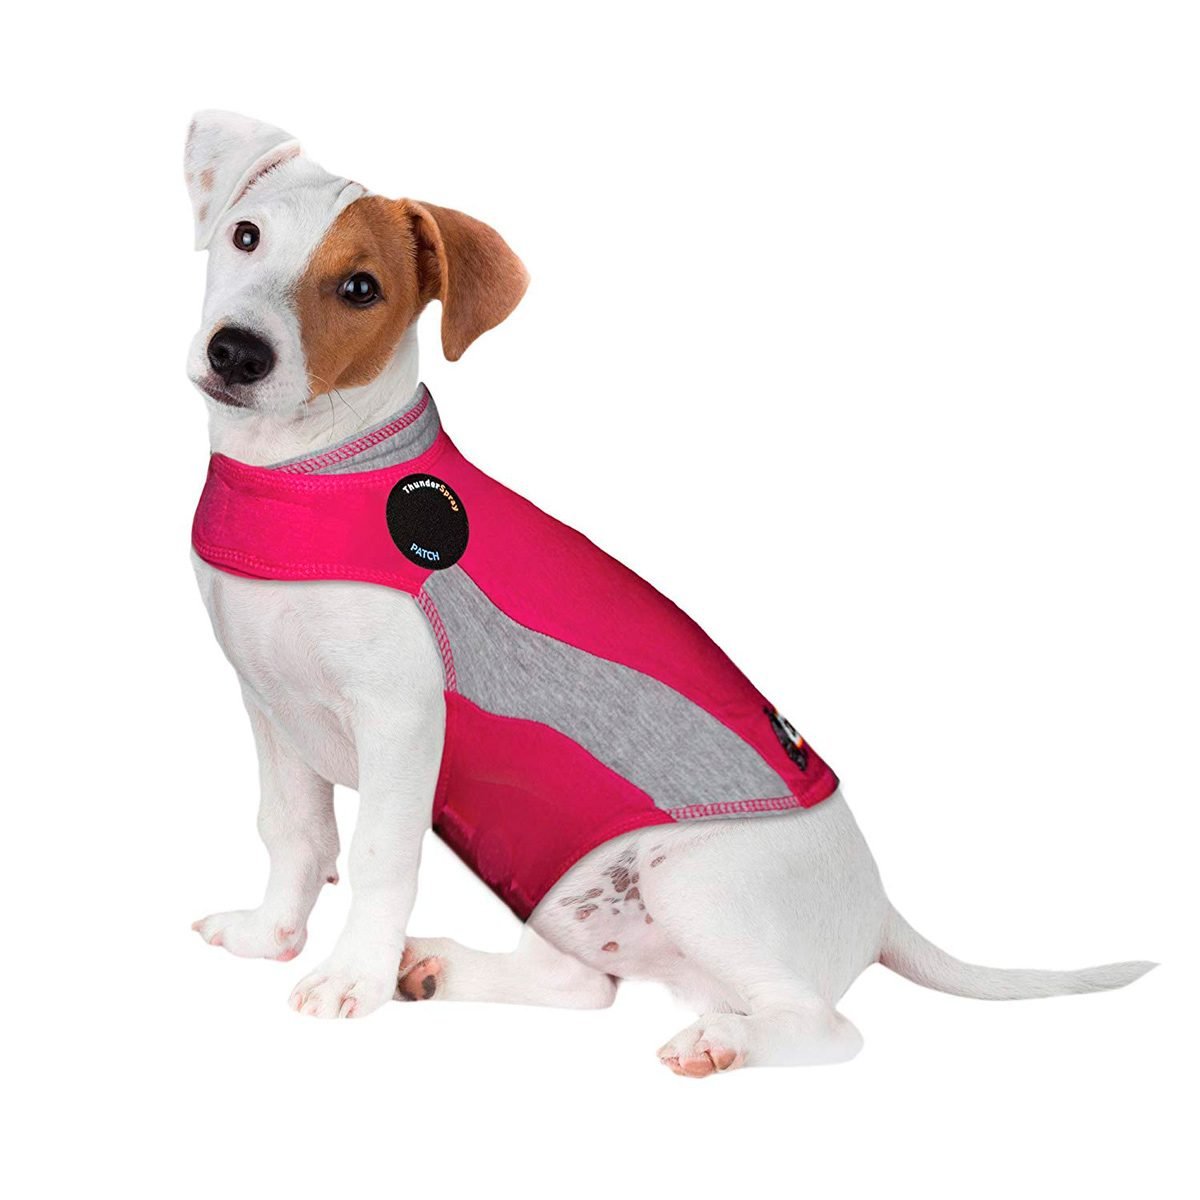 3-Level Adjustable Compression Thunder Shirt for Dogs and Cats NeoAlly Dog Thunder Jacket Anxiety Calming Vest with Most Torso Coverage Including Chest for Best Calming Effect 